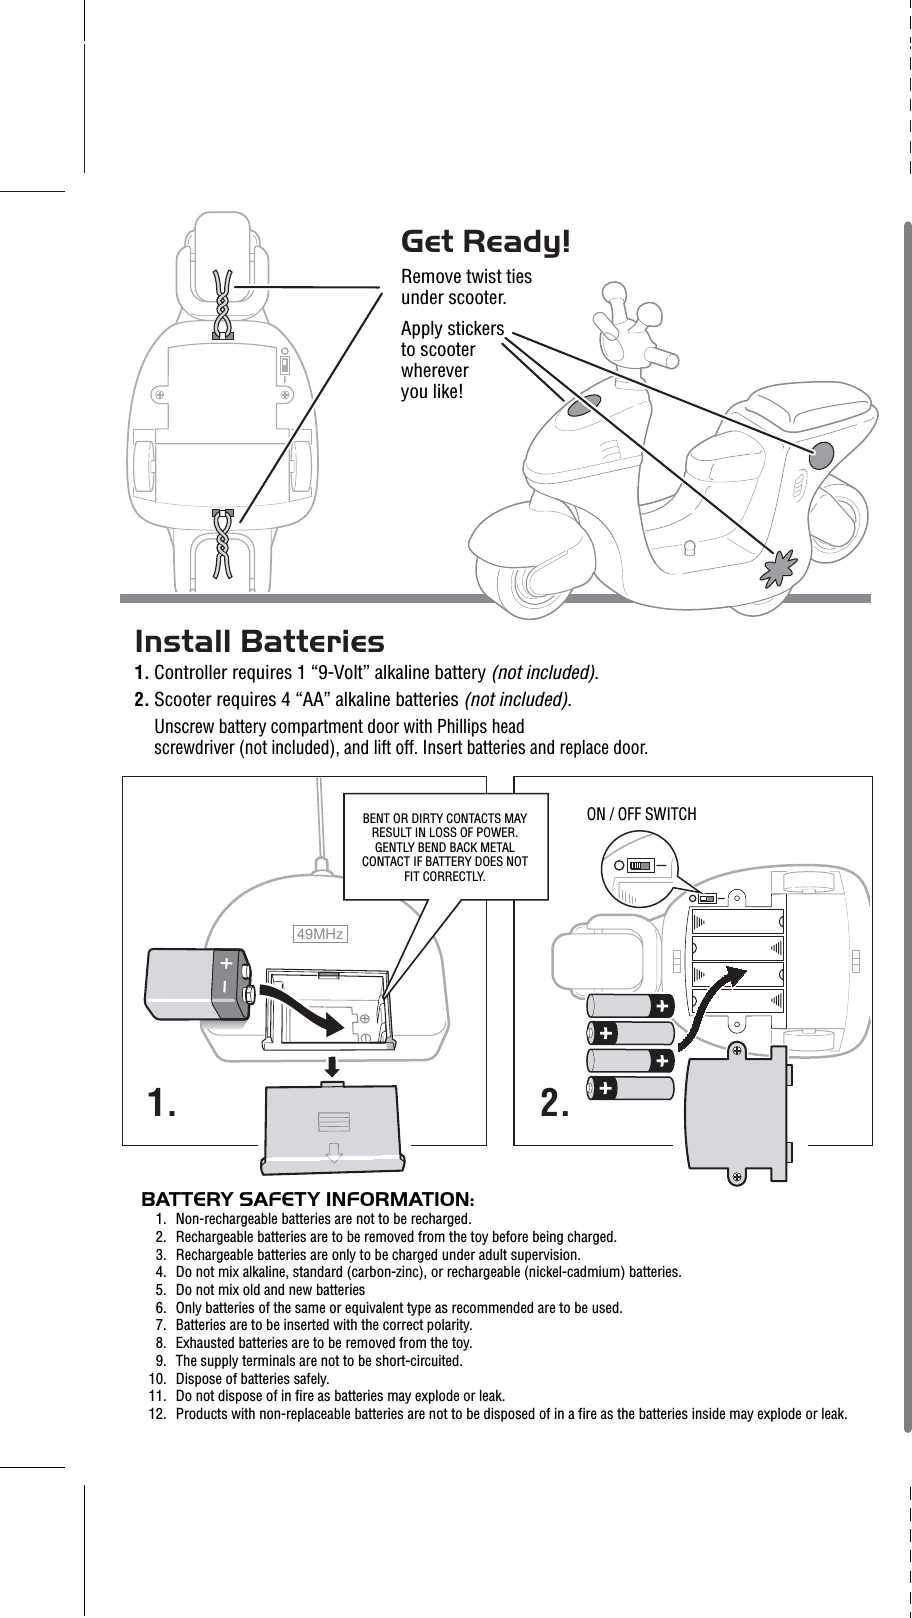 49MHzBATTERY SAFETY INFORMATION:1. Non-rechargeable batteries are not to be recharged.2. Rechargeable batteries are to be removed from the toy before being charged.3. Rechargeable batteries are only to be charged under adult supervision.4. Do not mix alkaline, standard (carbon-zinc), or rechargeable (nickel-cadmium) batteries.5. Do not mix old and new batteries 6. Only batteries of the same or equivalent type as recommended are to be used.7. Batteries are to be inserted with the correct polarity.8. Exhausted batteries are to be removed from the toy.9. The supply terminals are not to be short-circuited.10. Dispose of batteries safely.11. Do not dispose of in fire as batteries may explode or leak.12. Products with non-replaceable batteries are not to be disposed of in a fire as the batteries inside may explode or leak.1. 2.BENT OR DIRTY CONTACTS MAY RESULT IN LOSS OF POWER. GENTLY BEND BACK METAL CONTACT IF BATTERY DOES NOT FIT CORRECTLY.Install Batteries1. Controller requires 1 “9-Volt” alkaline battery (not included). 2. Scooter requires 4 “AA” alkaline batteries (not included). Unscrew battery compartment door with Phillips head screwdriver (not included), and lift off. Insert batteries and replace door.Get Ready!Remove twist tiesunder scooter. Apply stickers to scooter whereveryou like!ON / OFF SWITCH